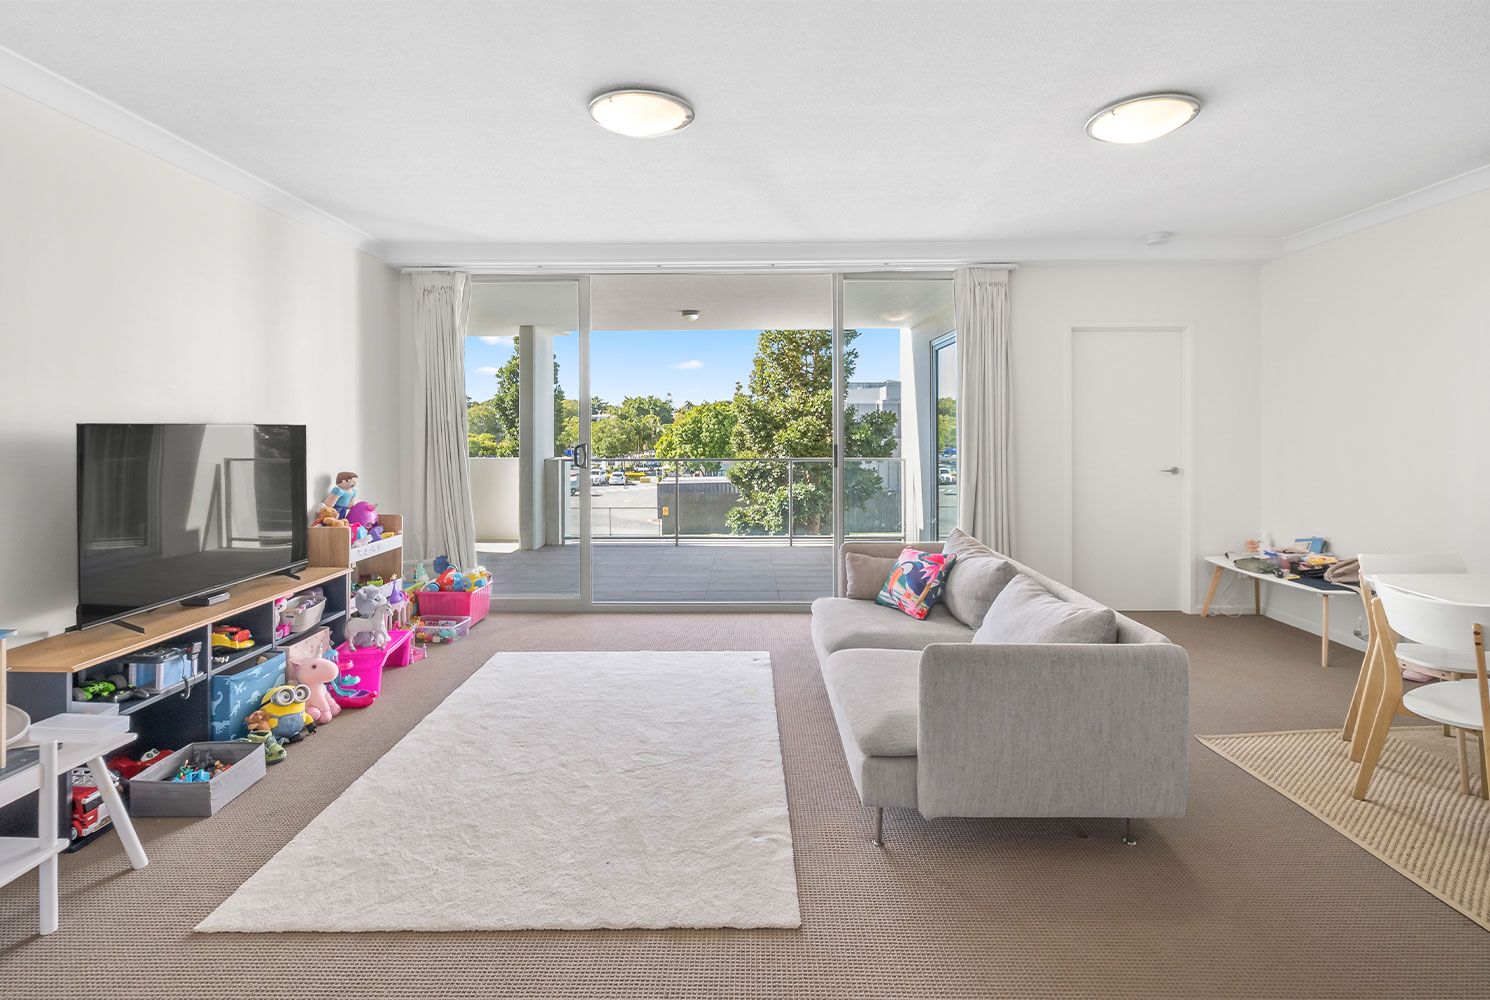 2 bedrooms Apartment / Unit / Flat in 5/23 Playfield Street CHERMSIDE QLD, 4032